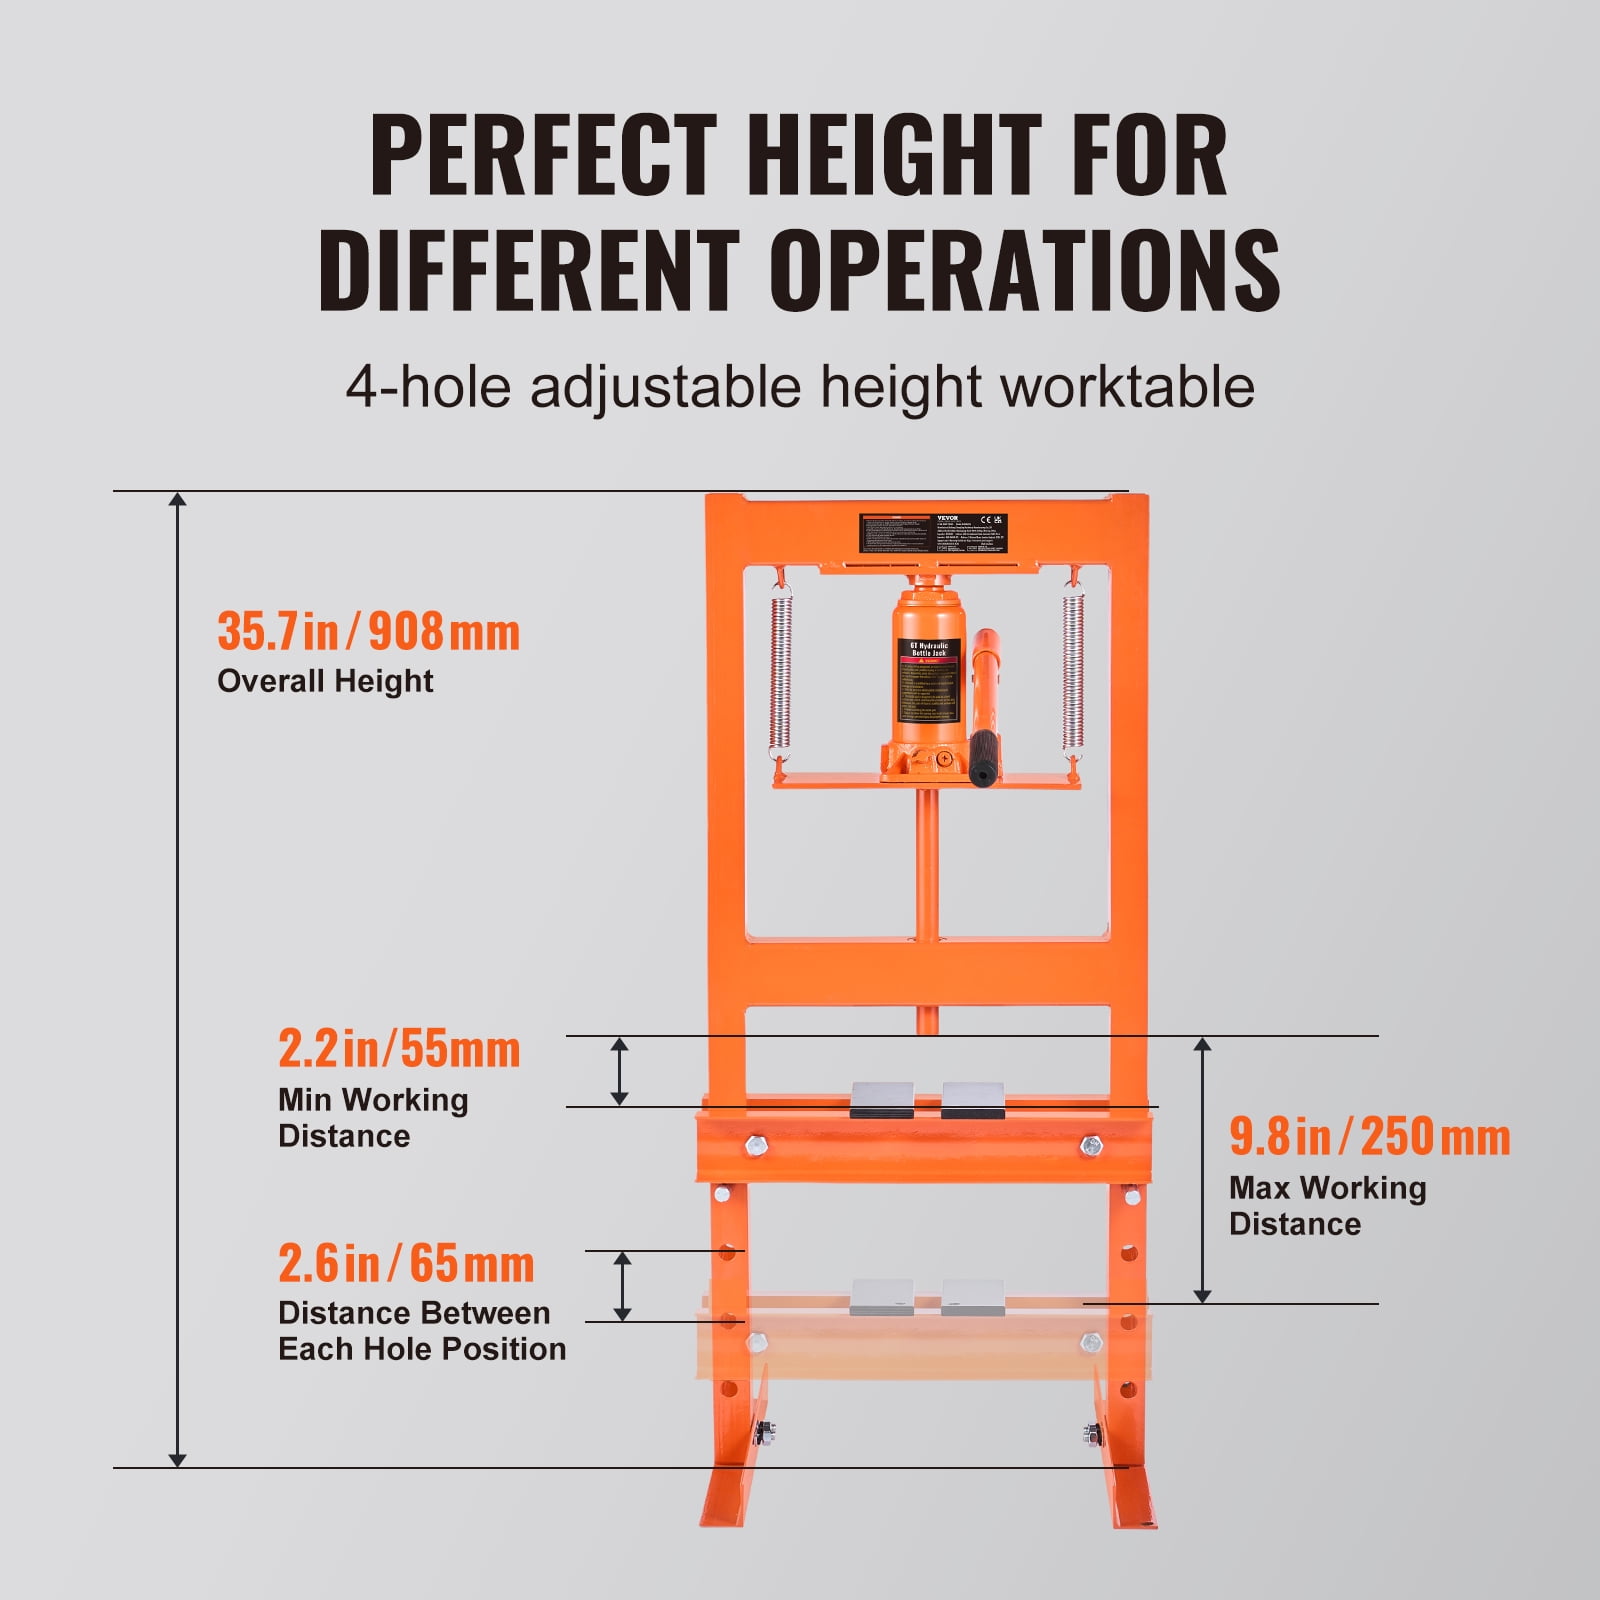 TUFFIOM 6-Ton Hydraulic Shop Press with Press Plates, H-Frame Garage  Benchtop Press, Adjustable Working Table Height, 18.9”L x 15.75”W x 36.8”H